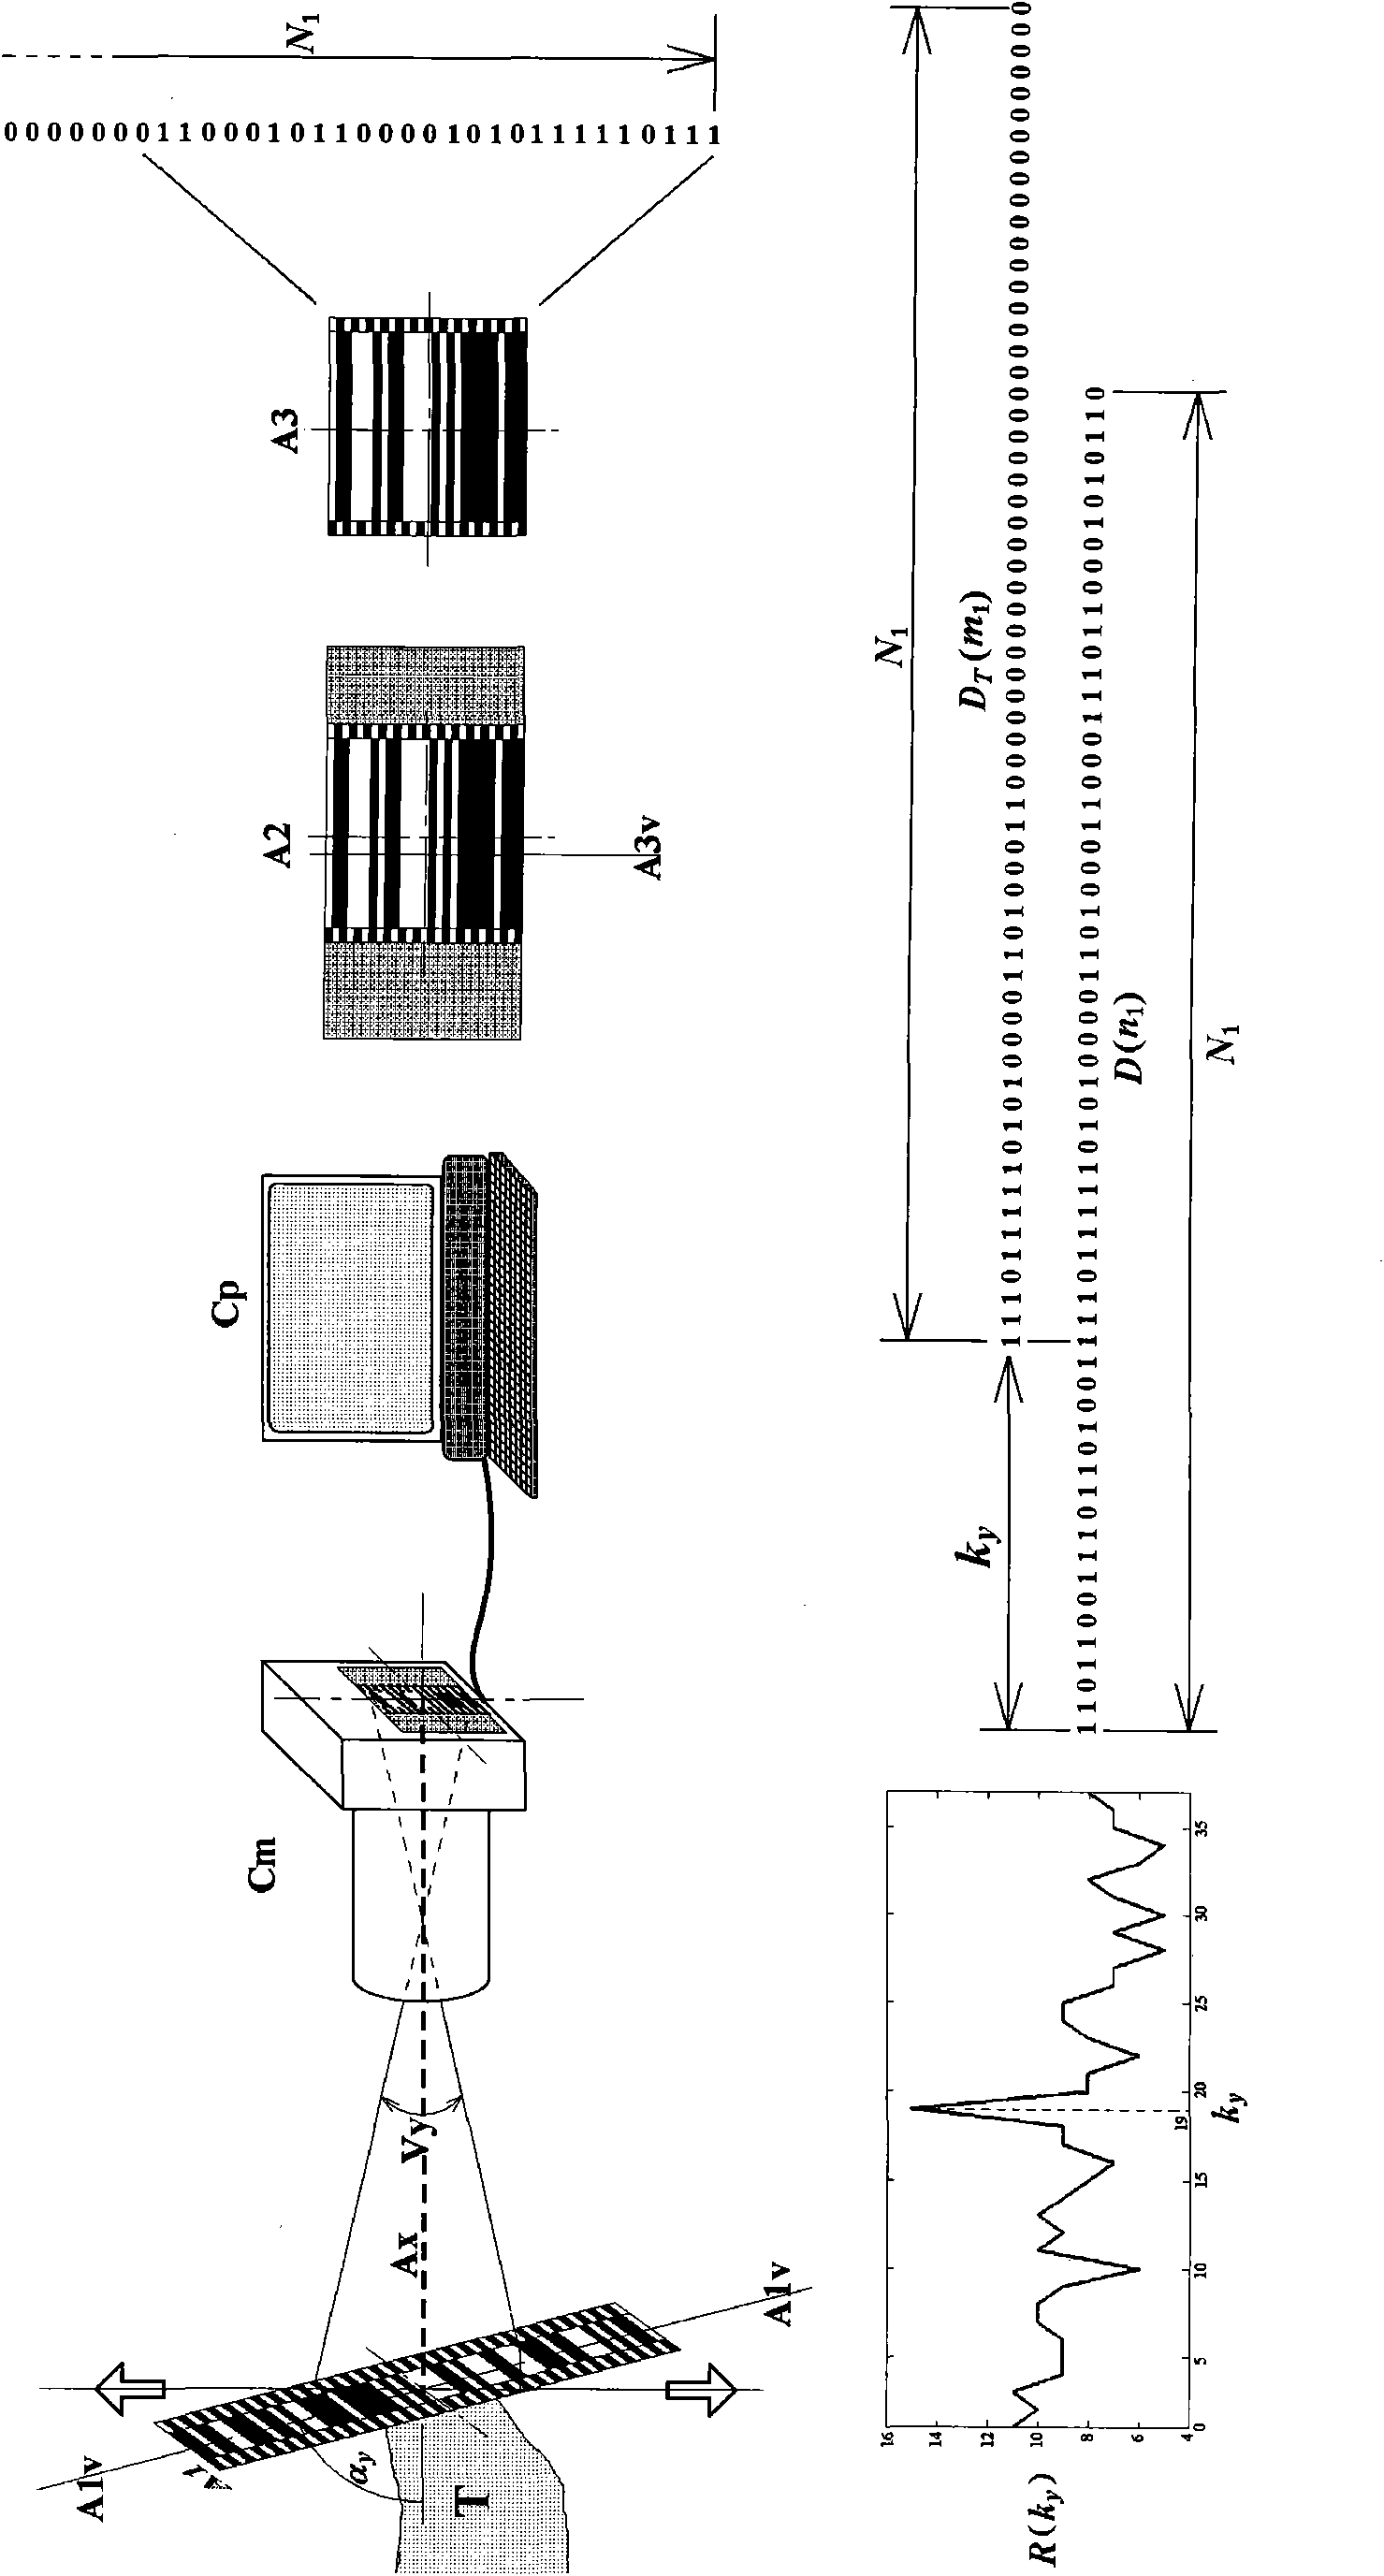 Method for detecting displacement of non-contact moving target